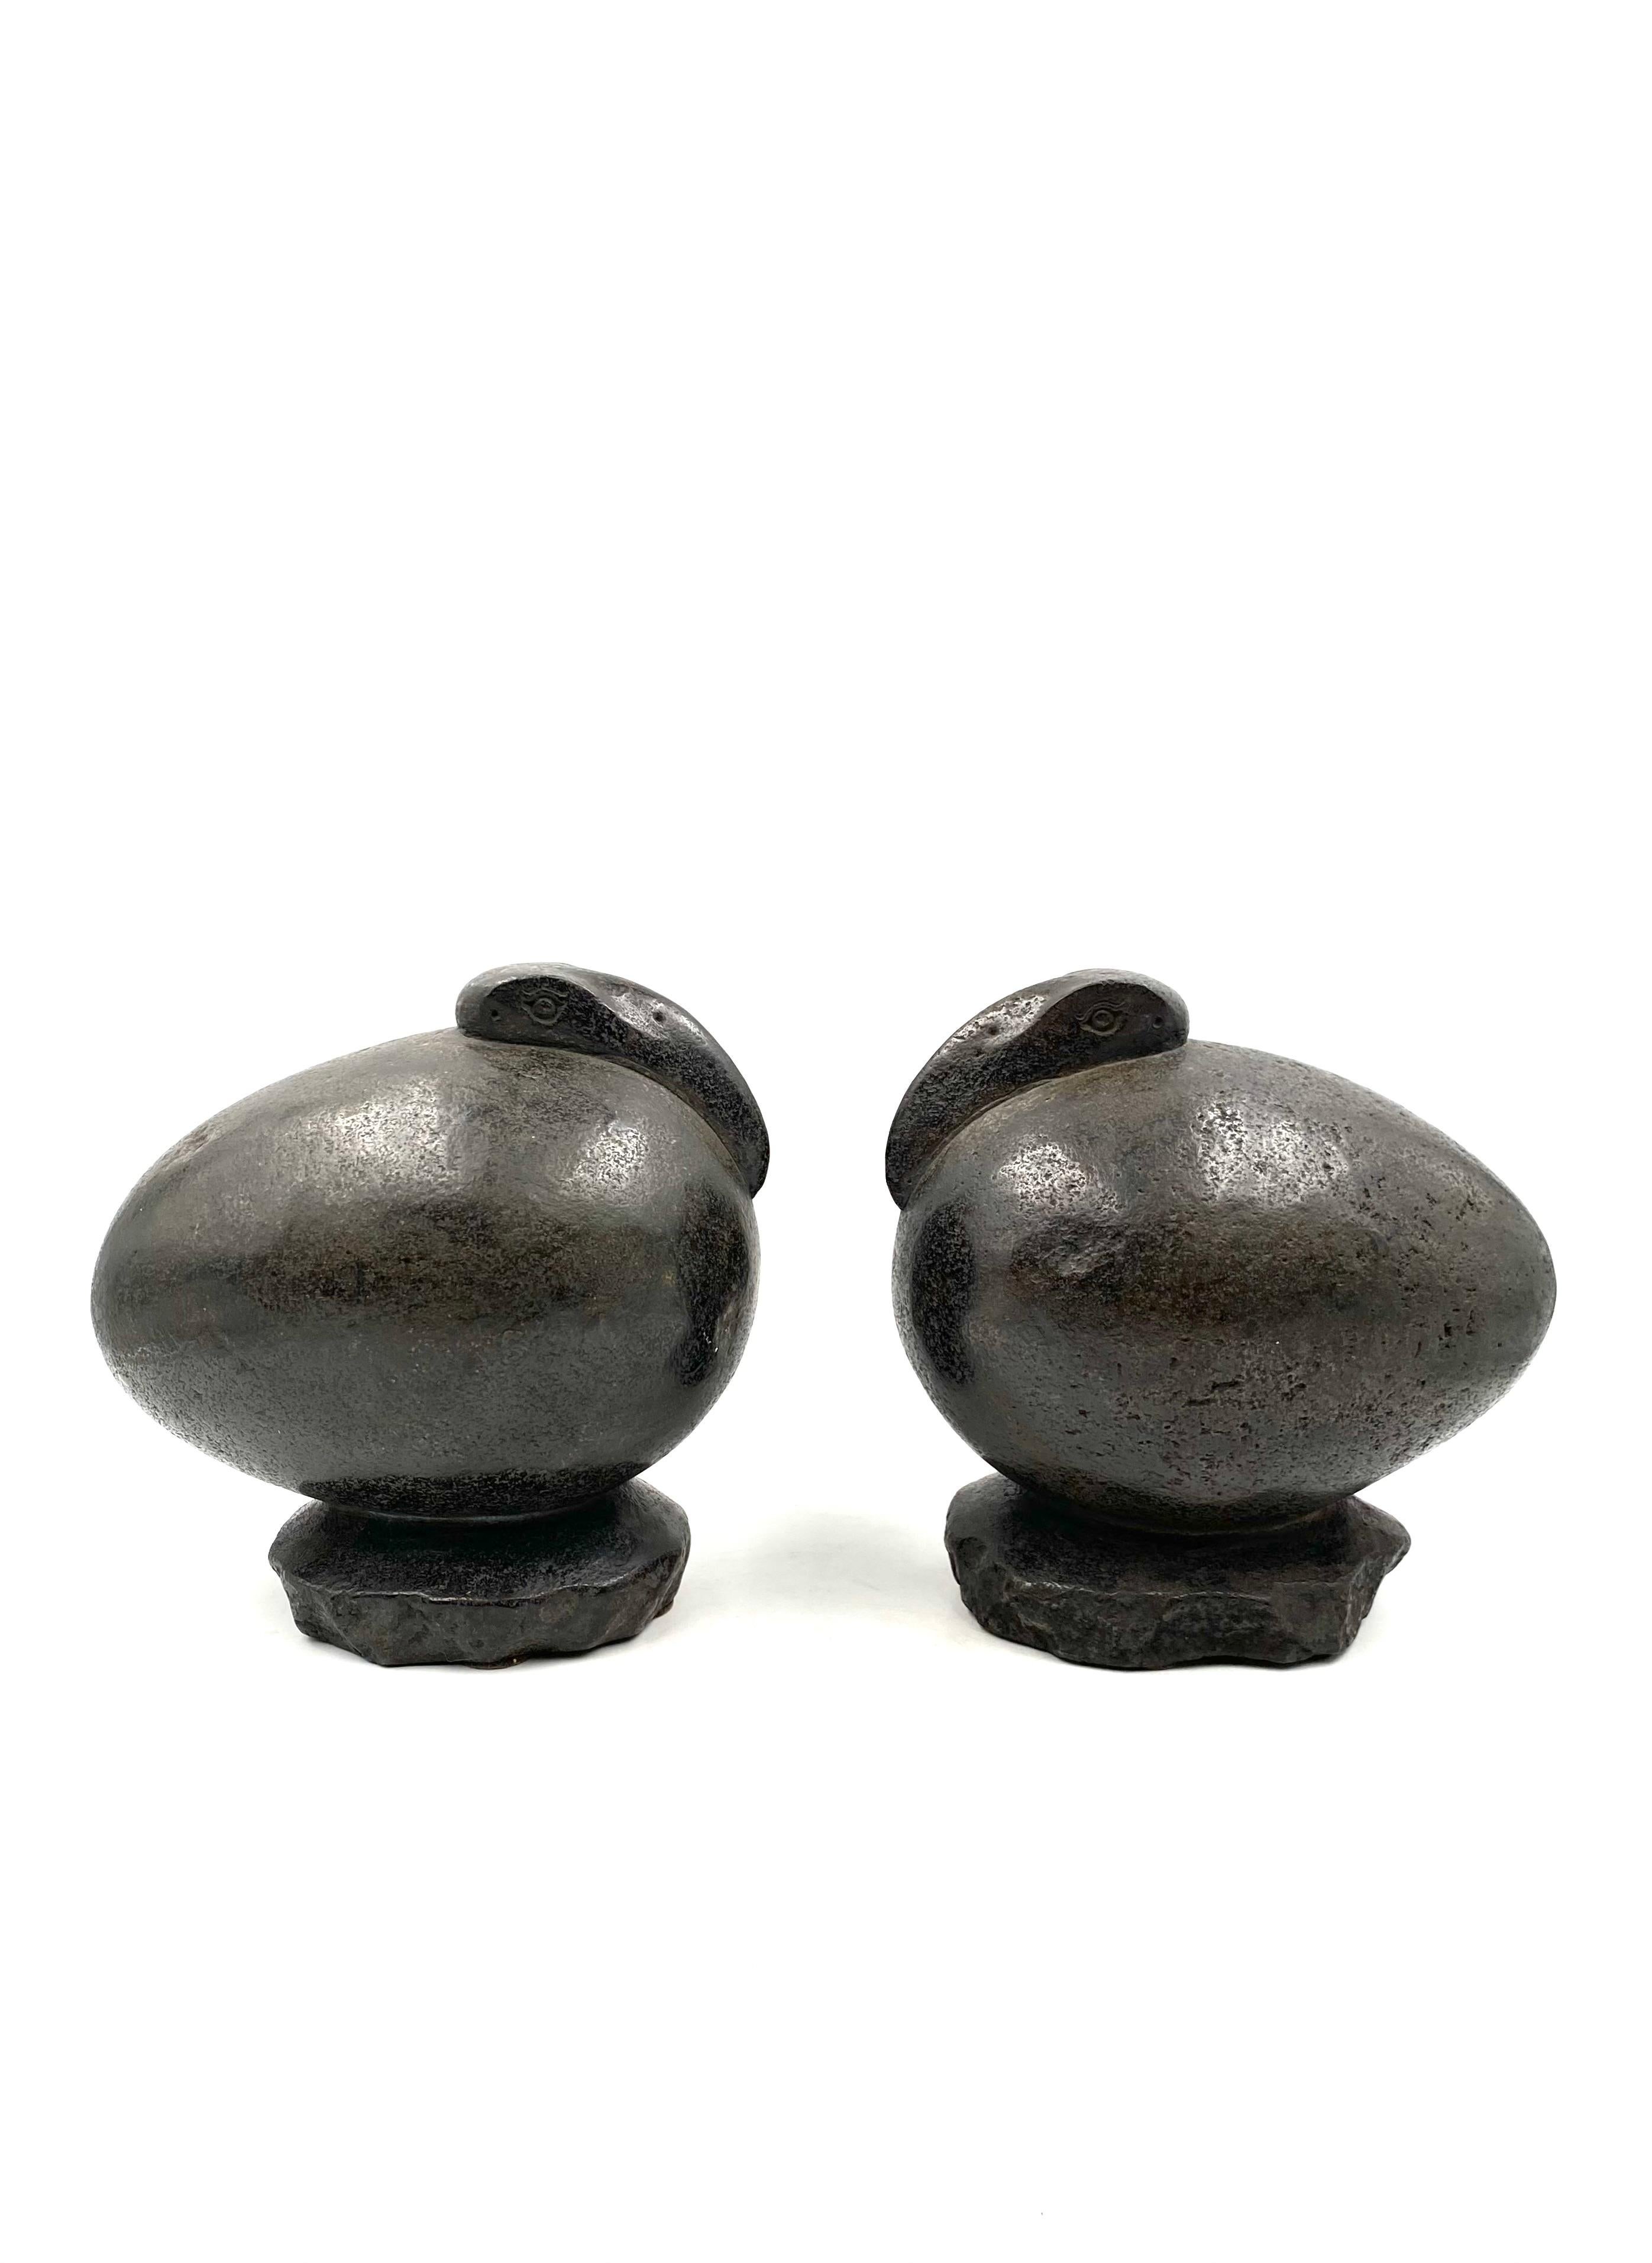 Ibis Birds, Pair of Basalt Ovoid Sculptures, France Early 20th Century 1